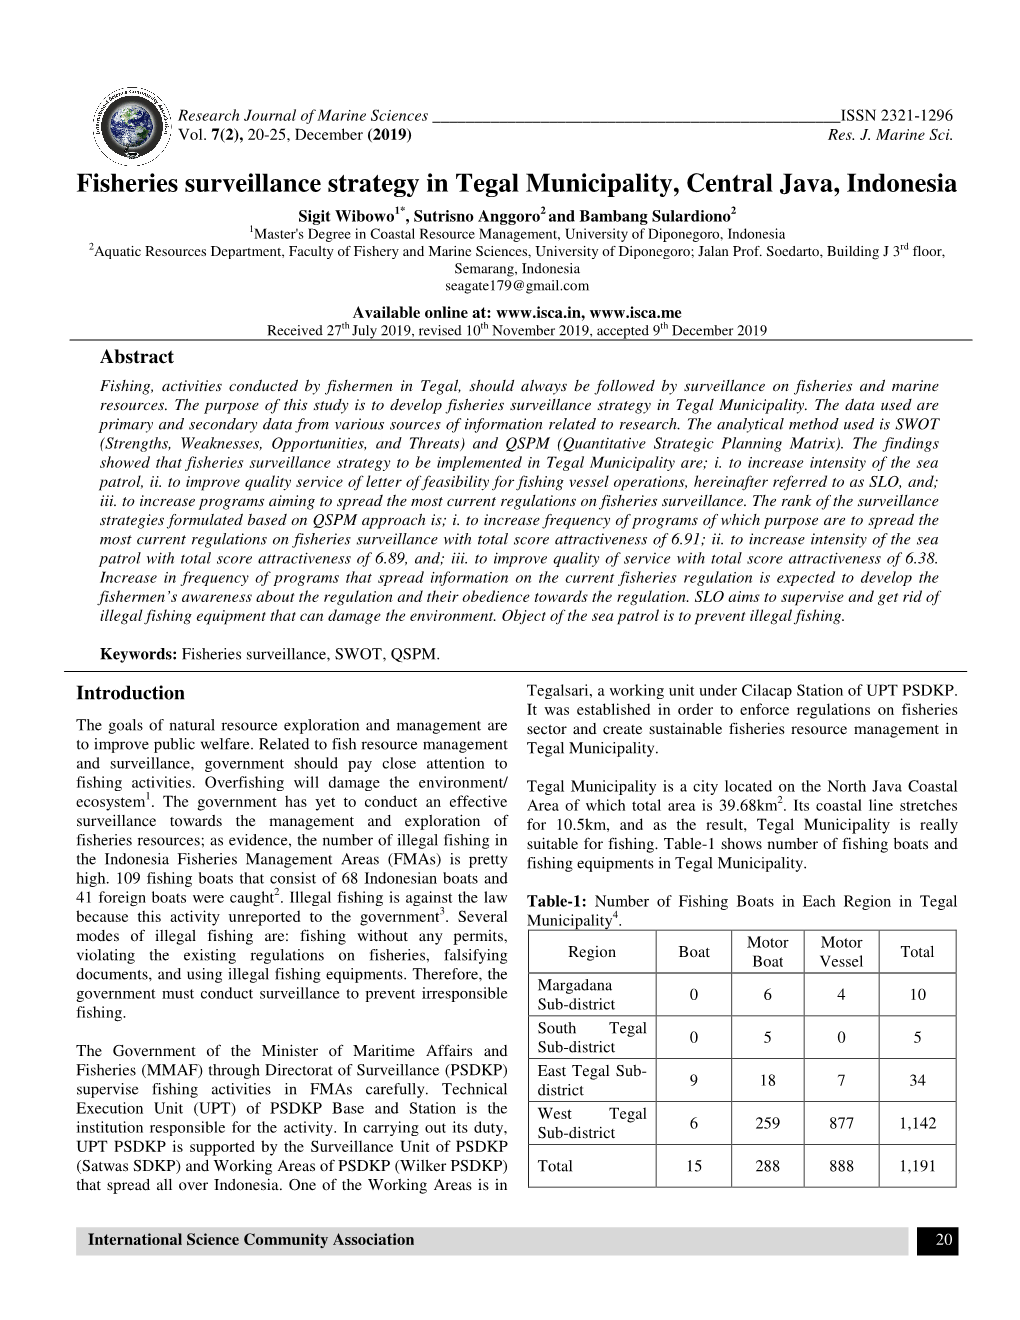 Fisheries Surveillance Strategy in Tegal